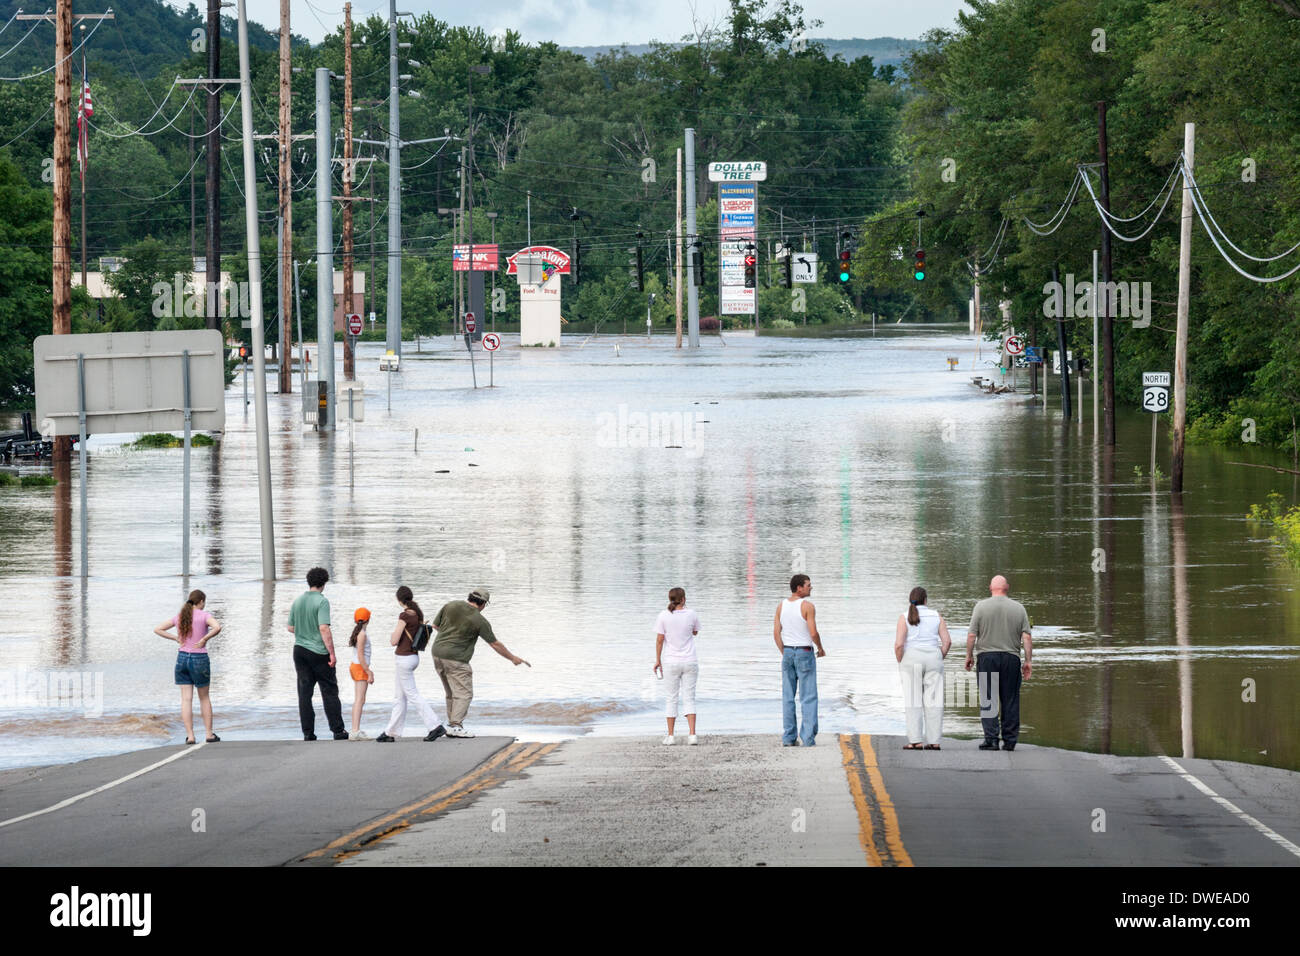 Flooding of Susquehanna River in commercial district Oneonta New York June 2006 Stock Photo